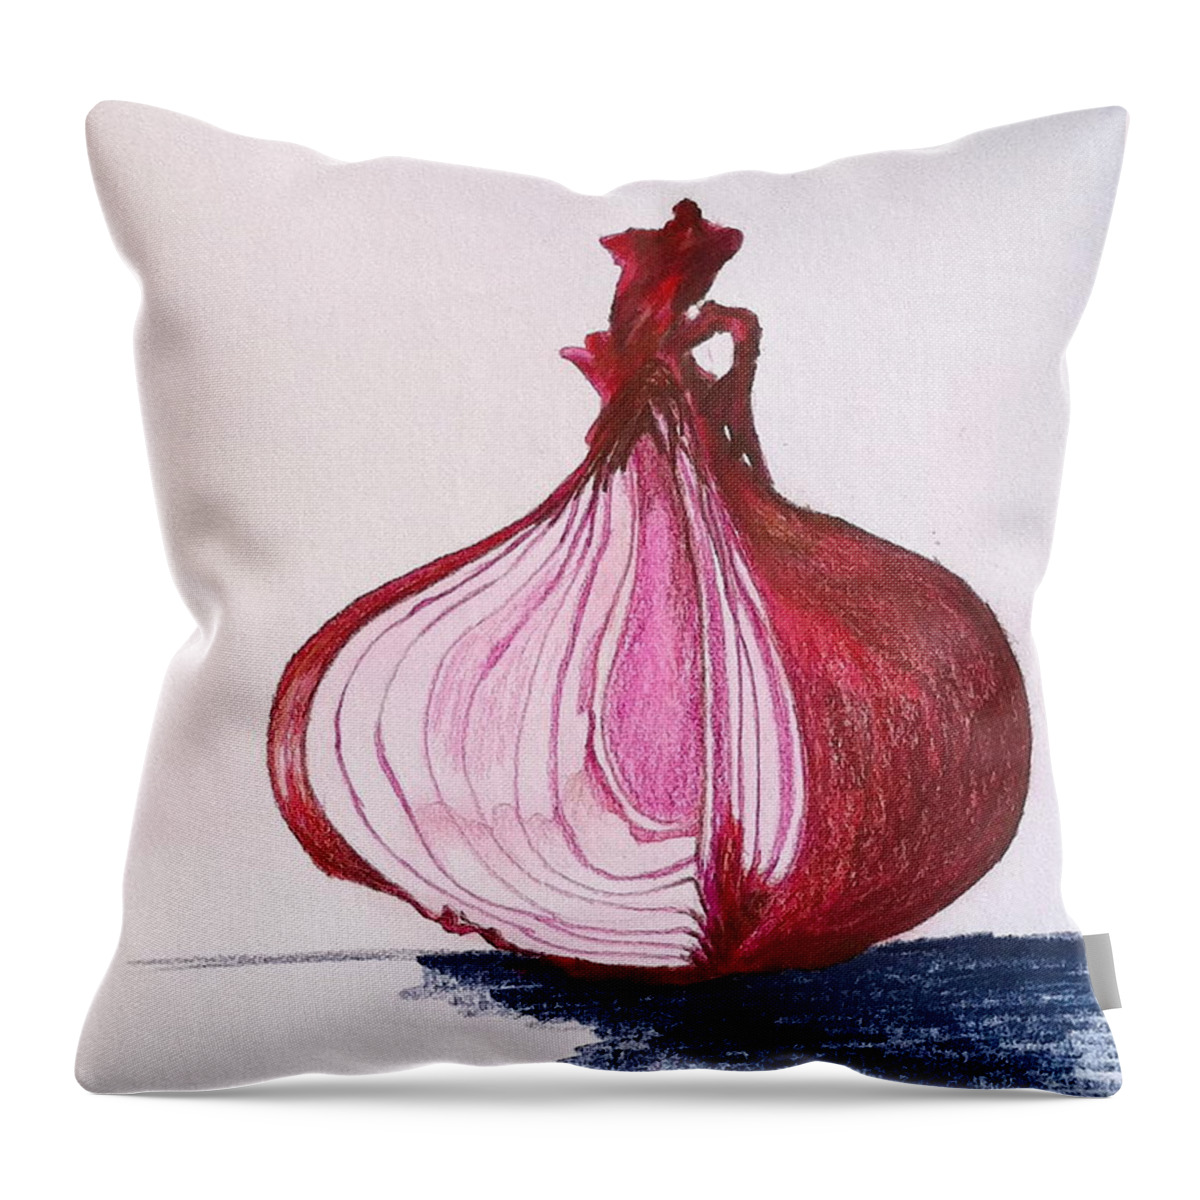 Food Throw Pillow featuring the drawing Red Onion by Sheron Petrie